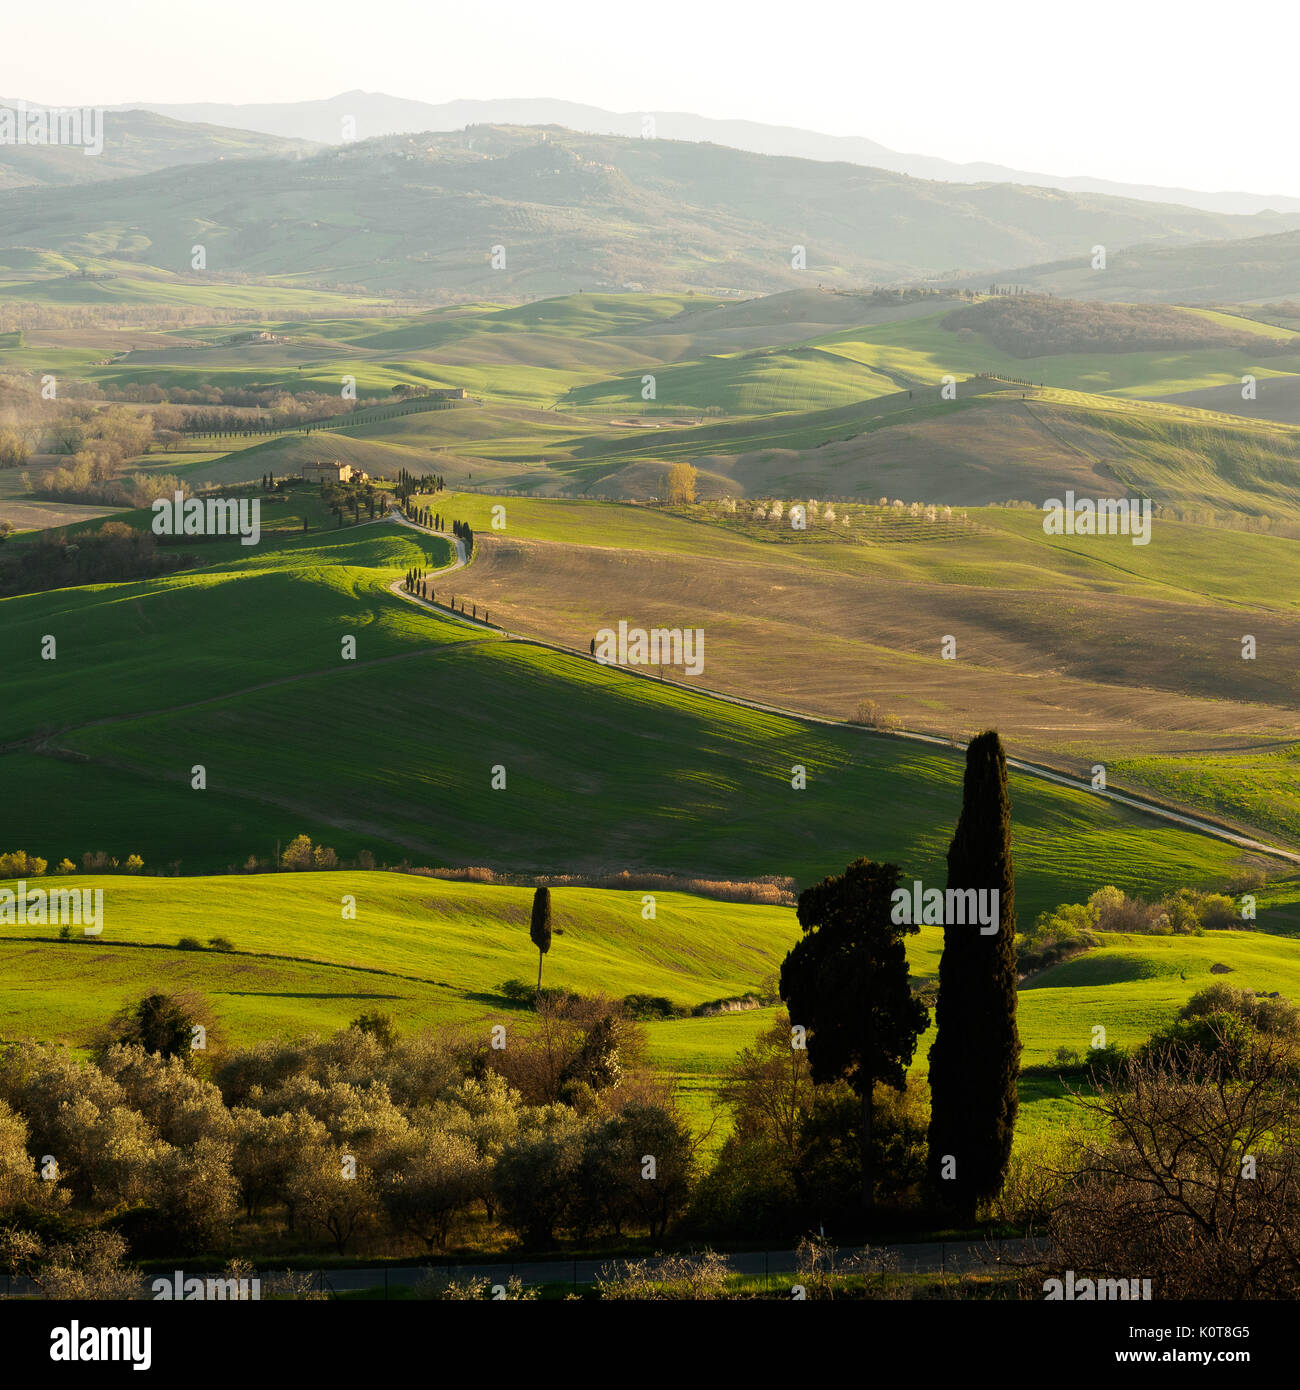 Val d'Orcia landscape at sunset from the town of Pienza (Siena). Italy, 2017. Squared format. Stock Photo